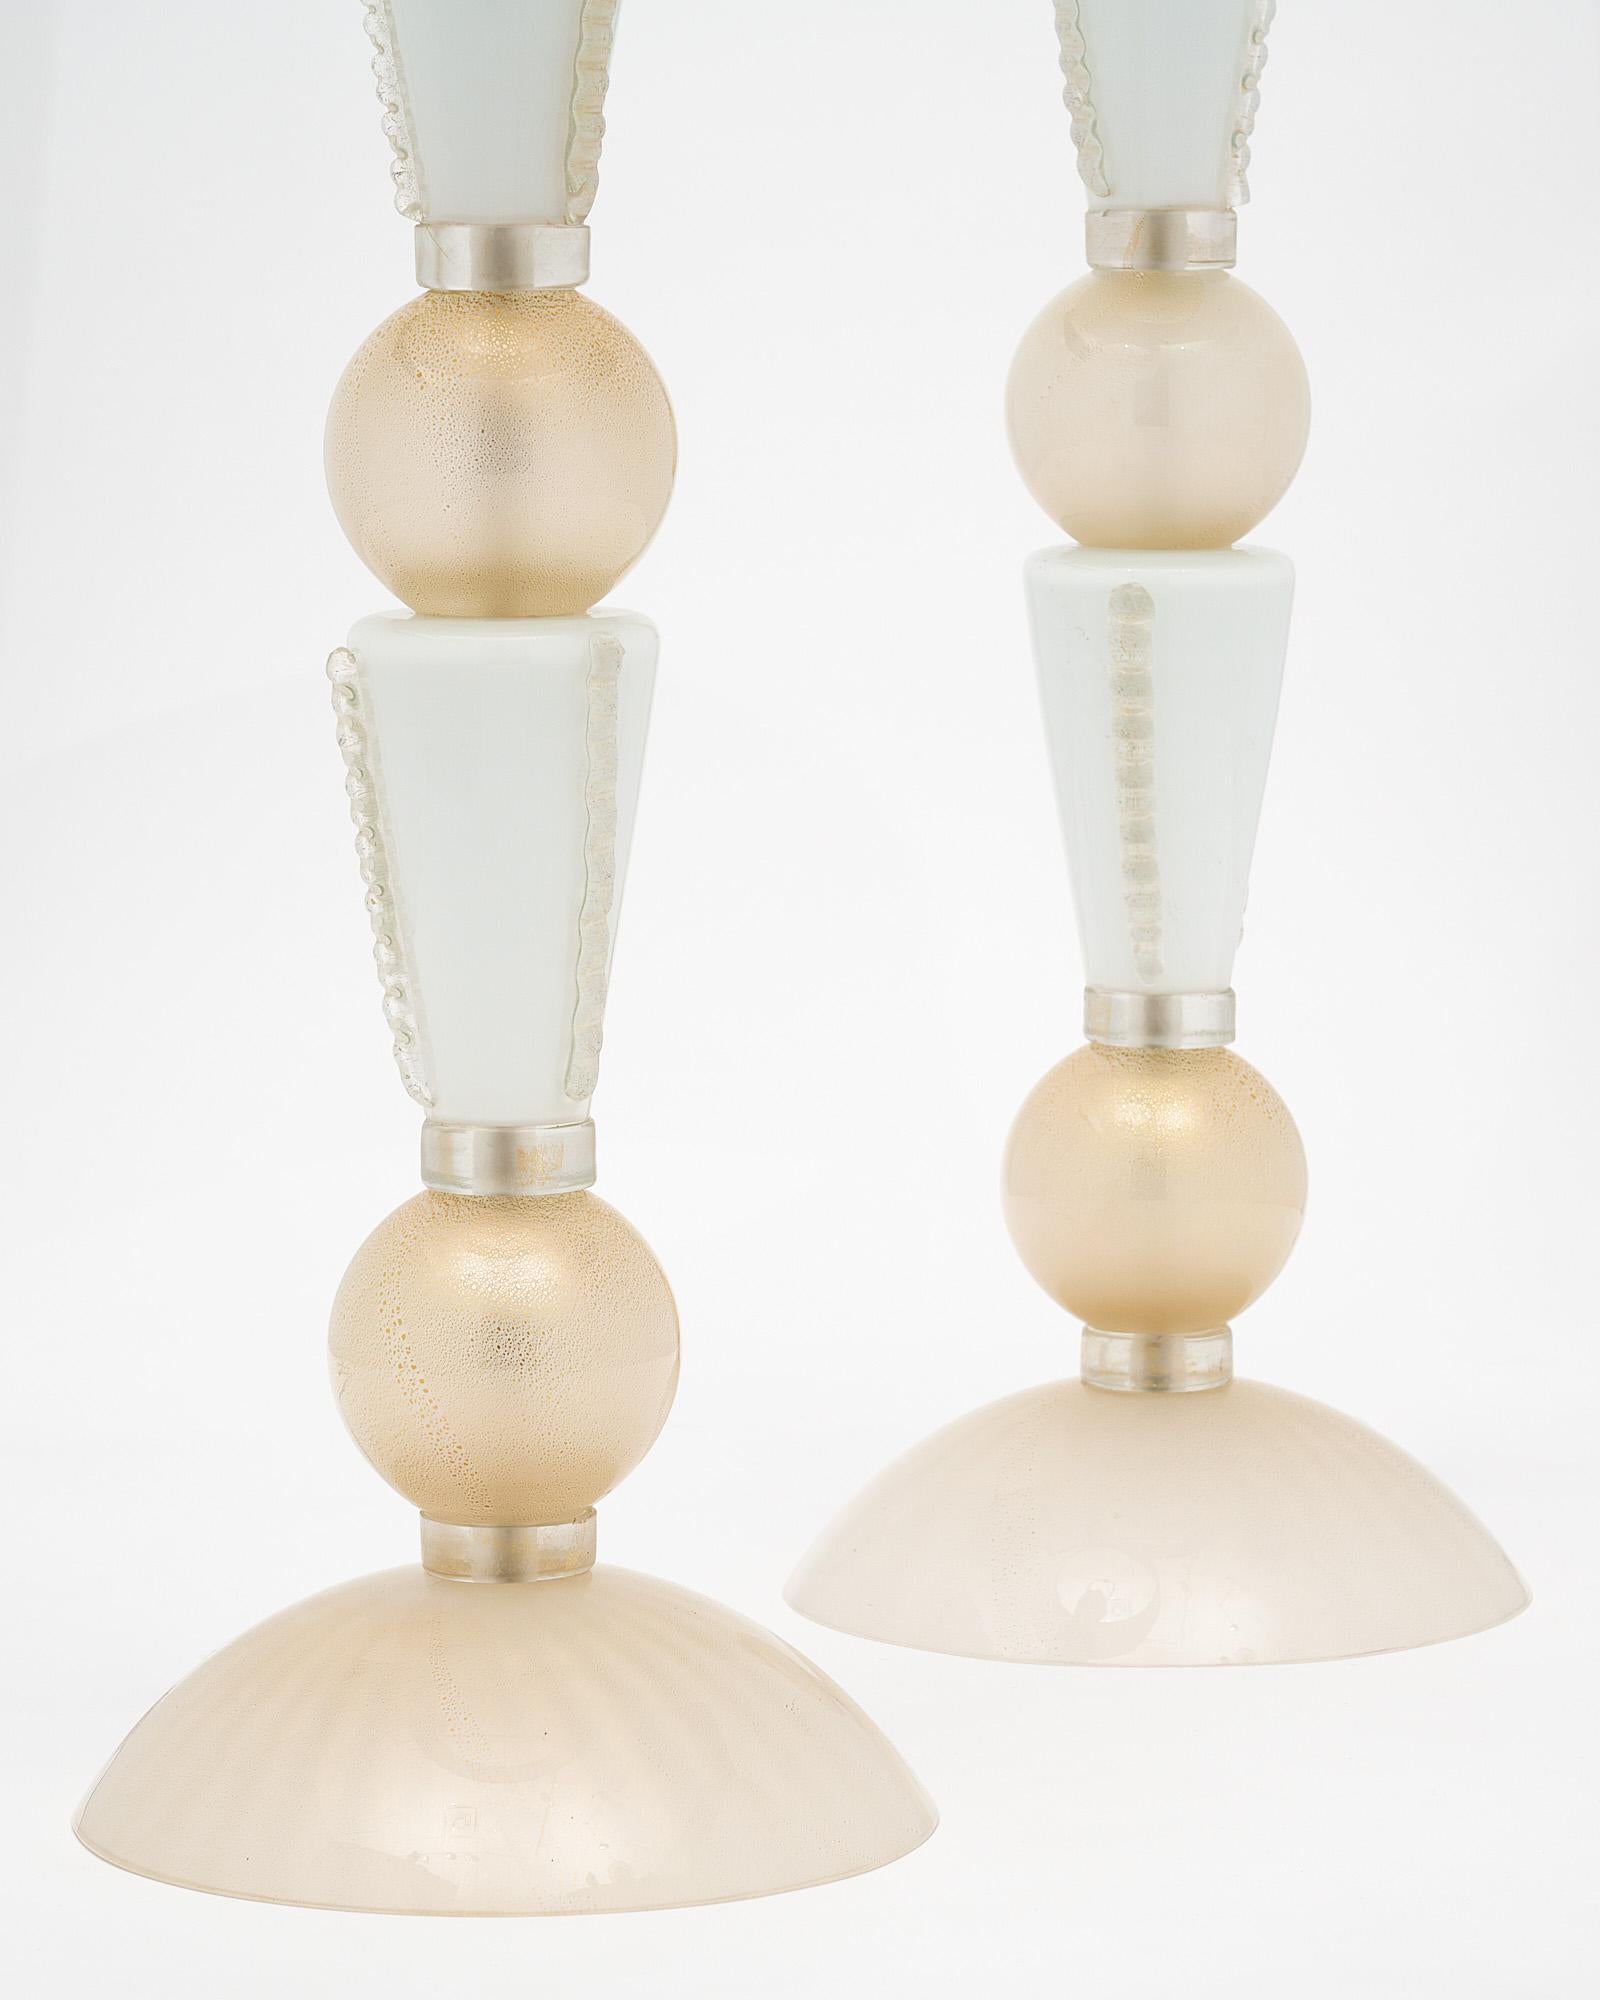 Pair of Murano glass lamps from Italy. This hand blown pair of lamps features alternating glass components between spheric and conic, gold and white. The gold has avventurina 23 carat gold flecks fused throughout. They have been newly wired to fit